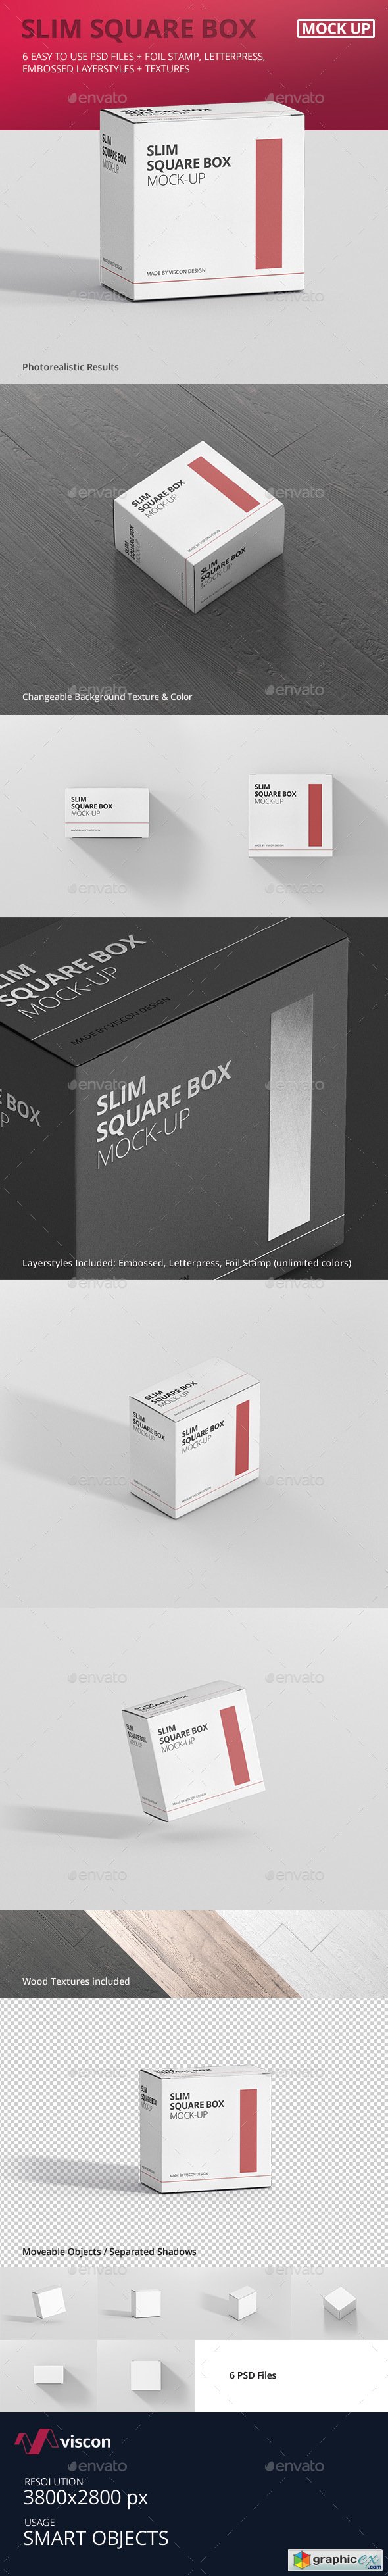 Package Box Mock-Up - Slim Square